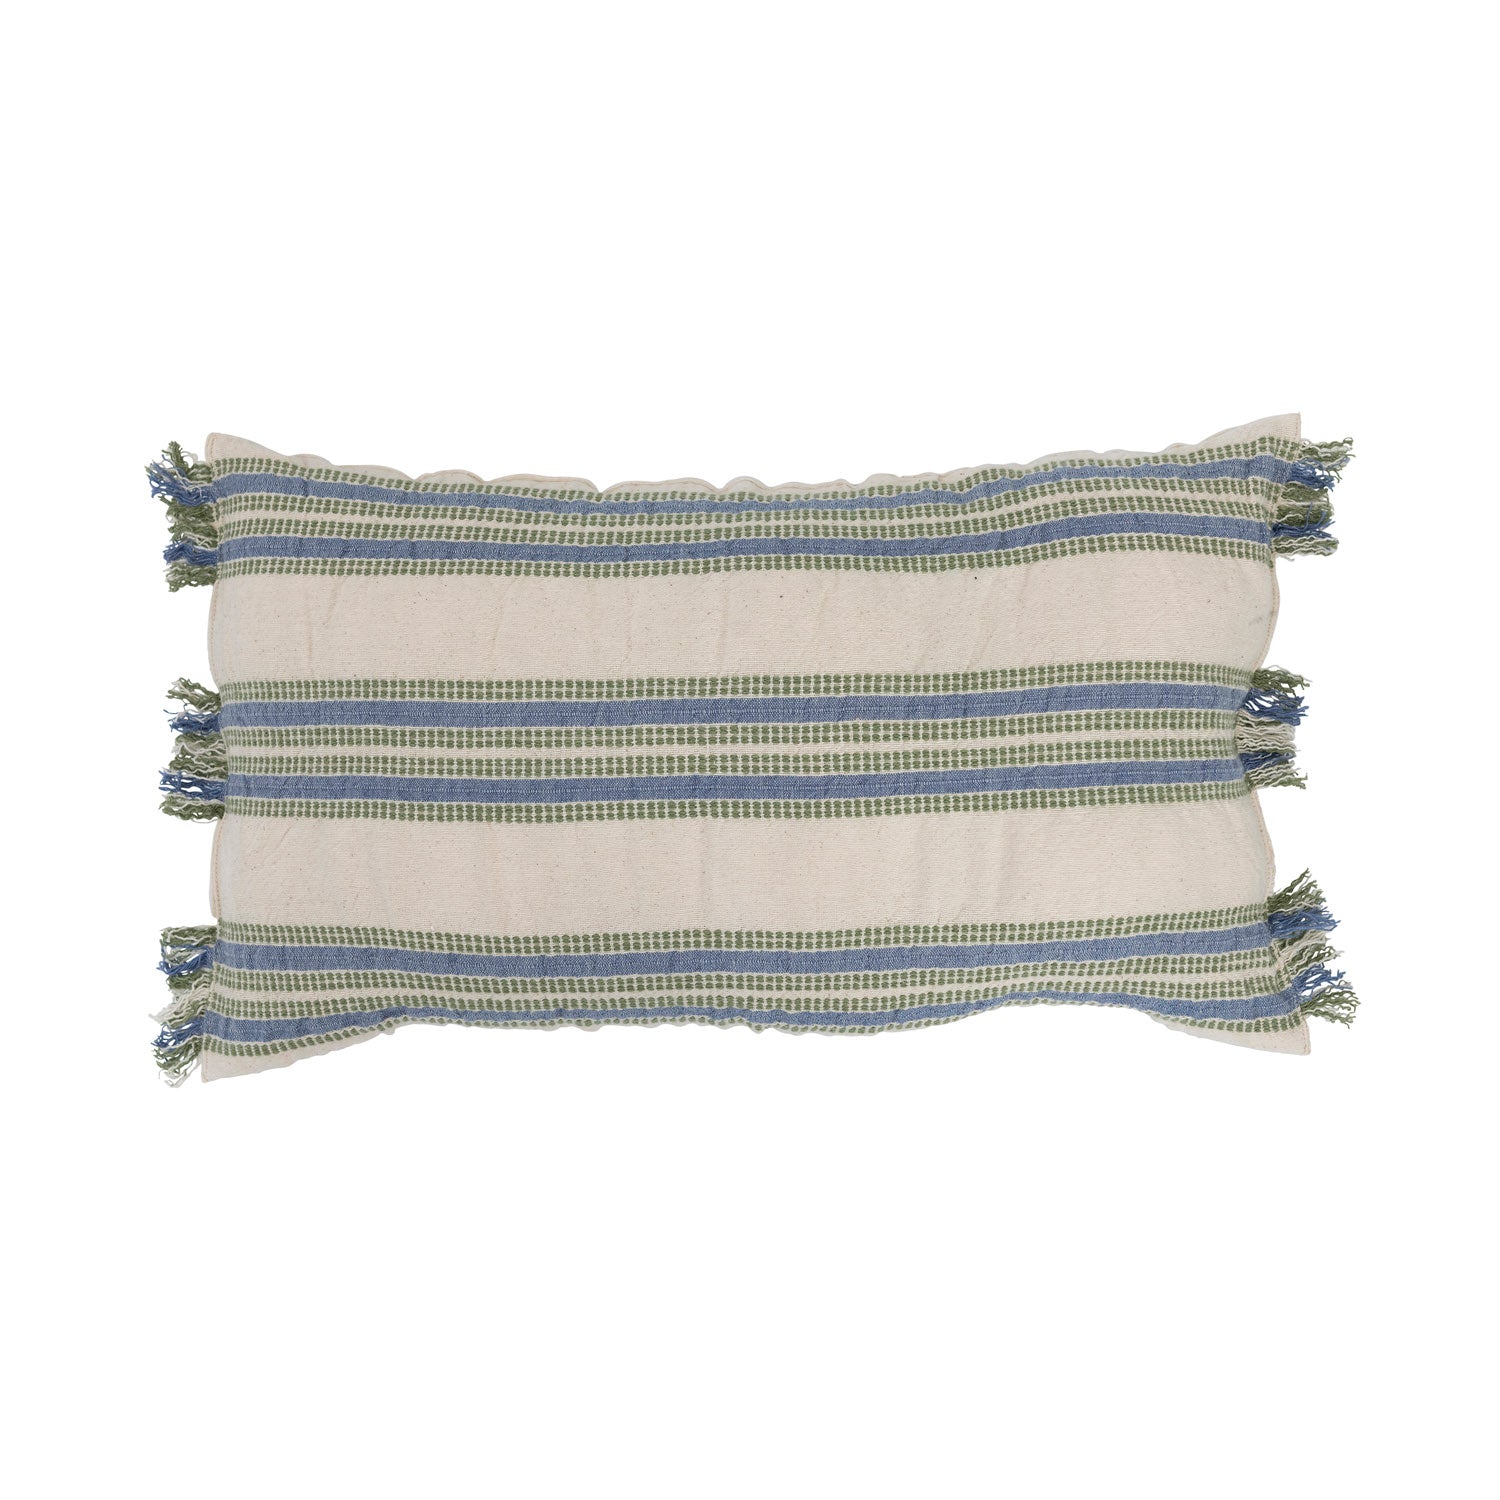 Woven Cotton Lumbar Pillow with Stripes & Fringe